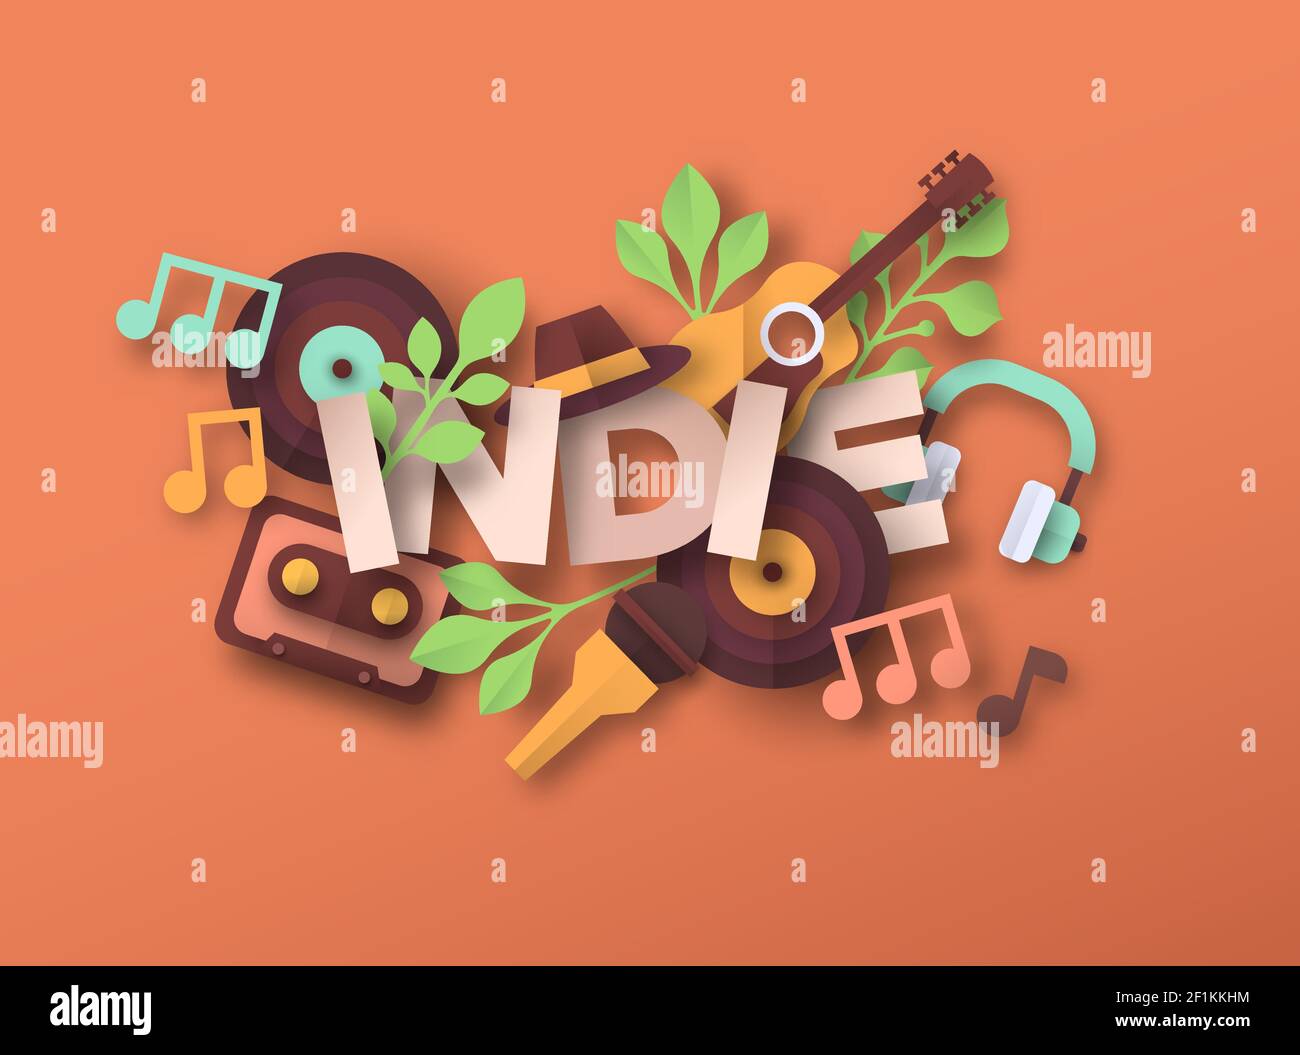 Indie music style illustration with 3d paper cut musical instrument icons. Independent band concert, live acoustic event concept. Includes microphone, Stock Vector